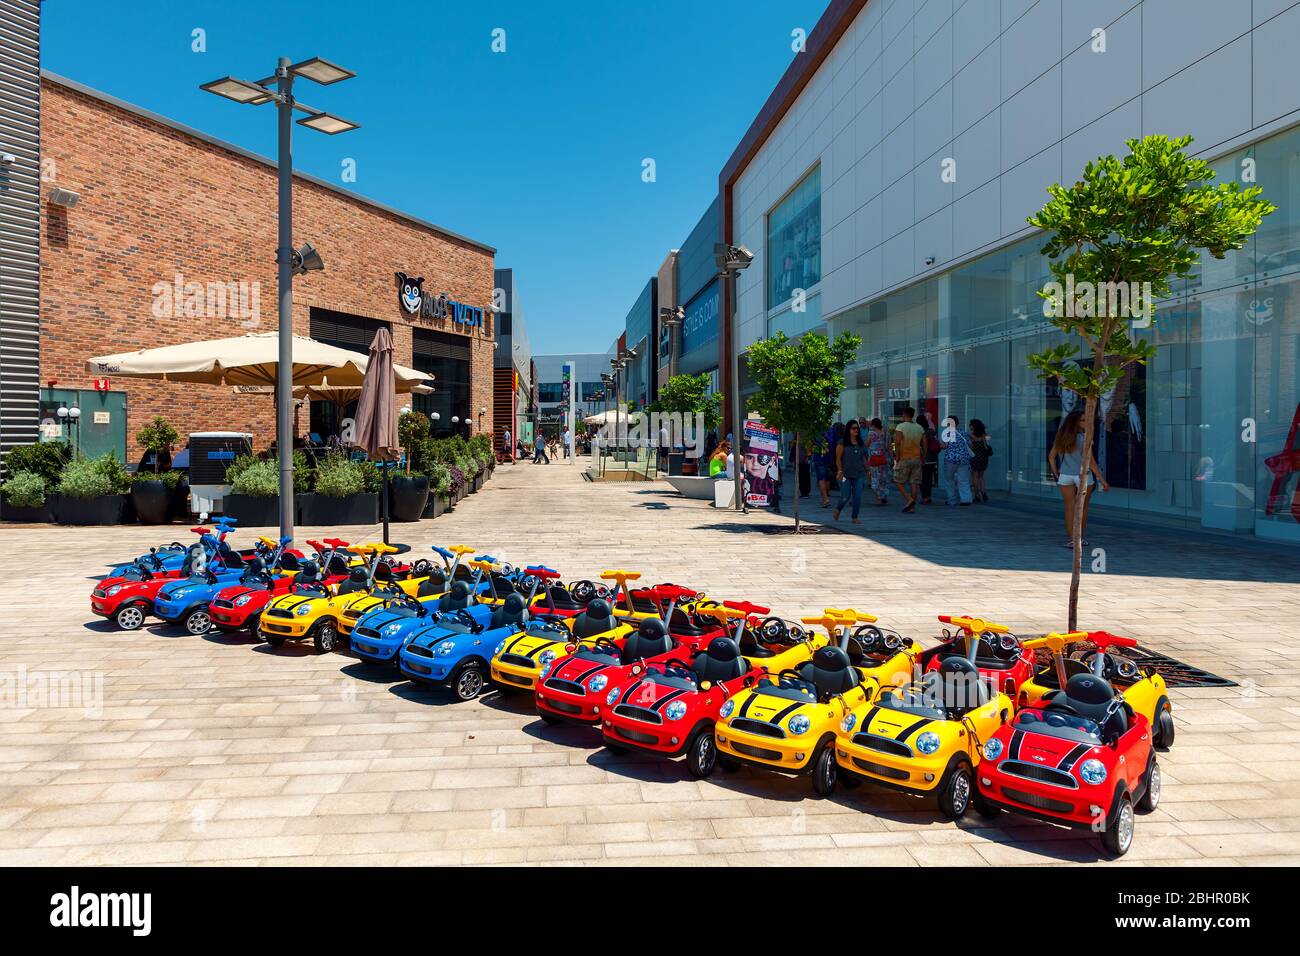 Shops, boutiques and stores in open air mall in Ashdod, Israel Stock Photo  - Alamy